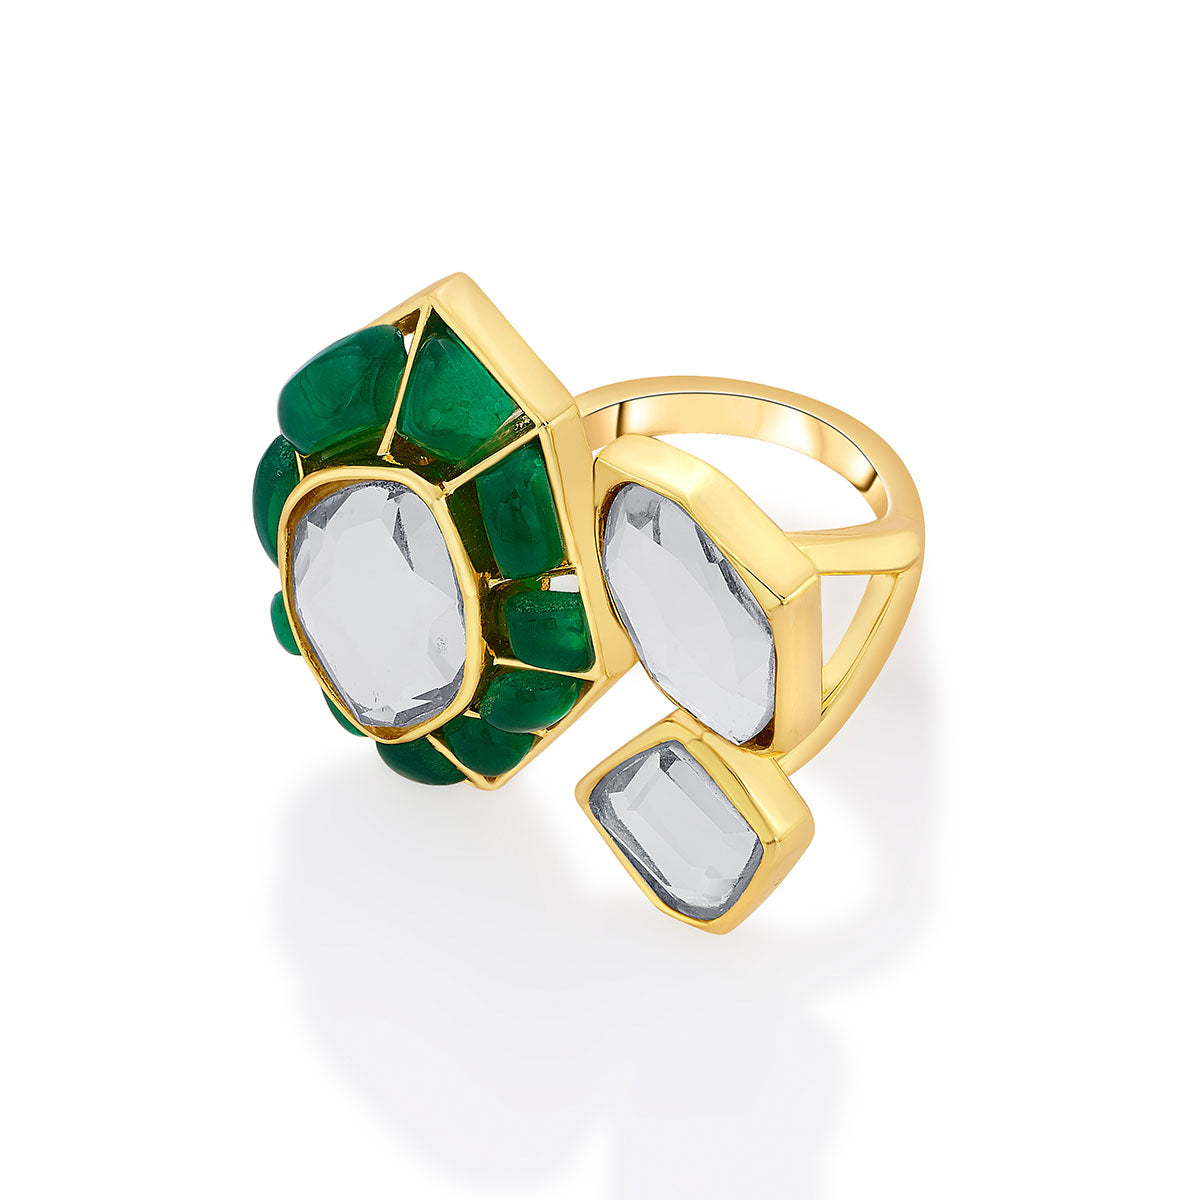 Emerald Ring: Buy Emerald Floral Diamond Cocktail Ring Online in India